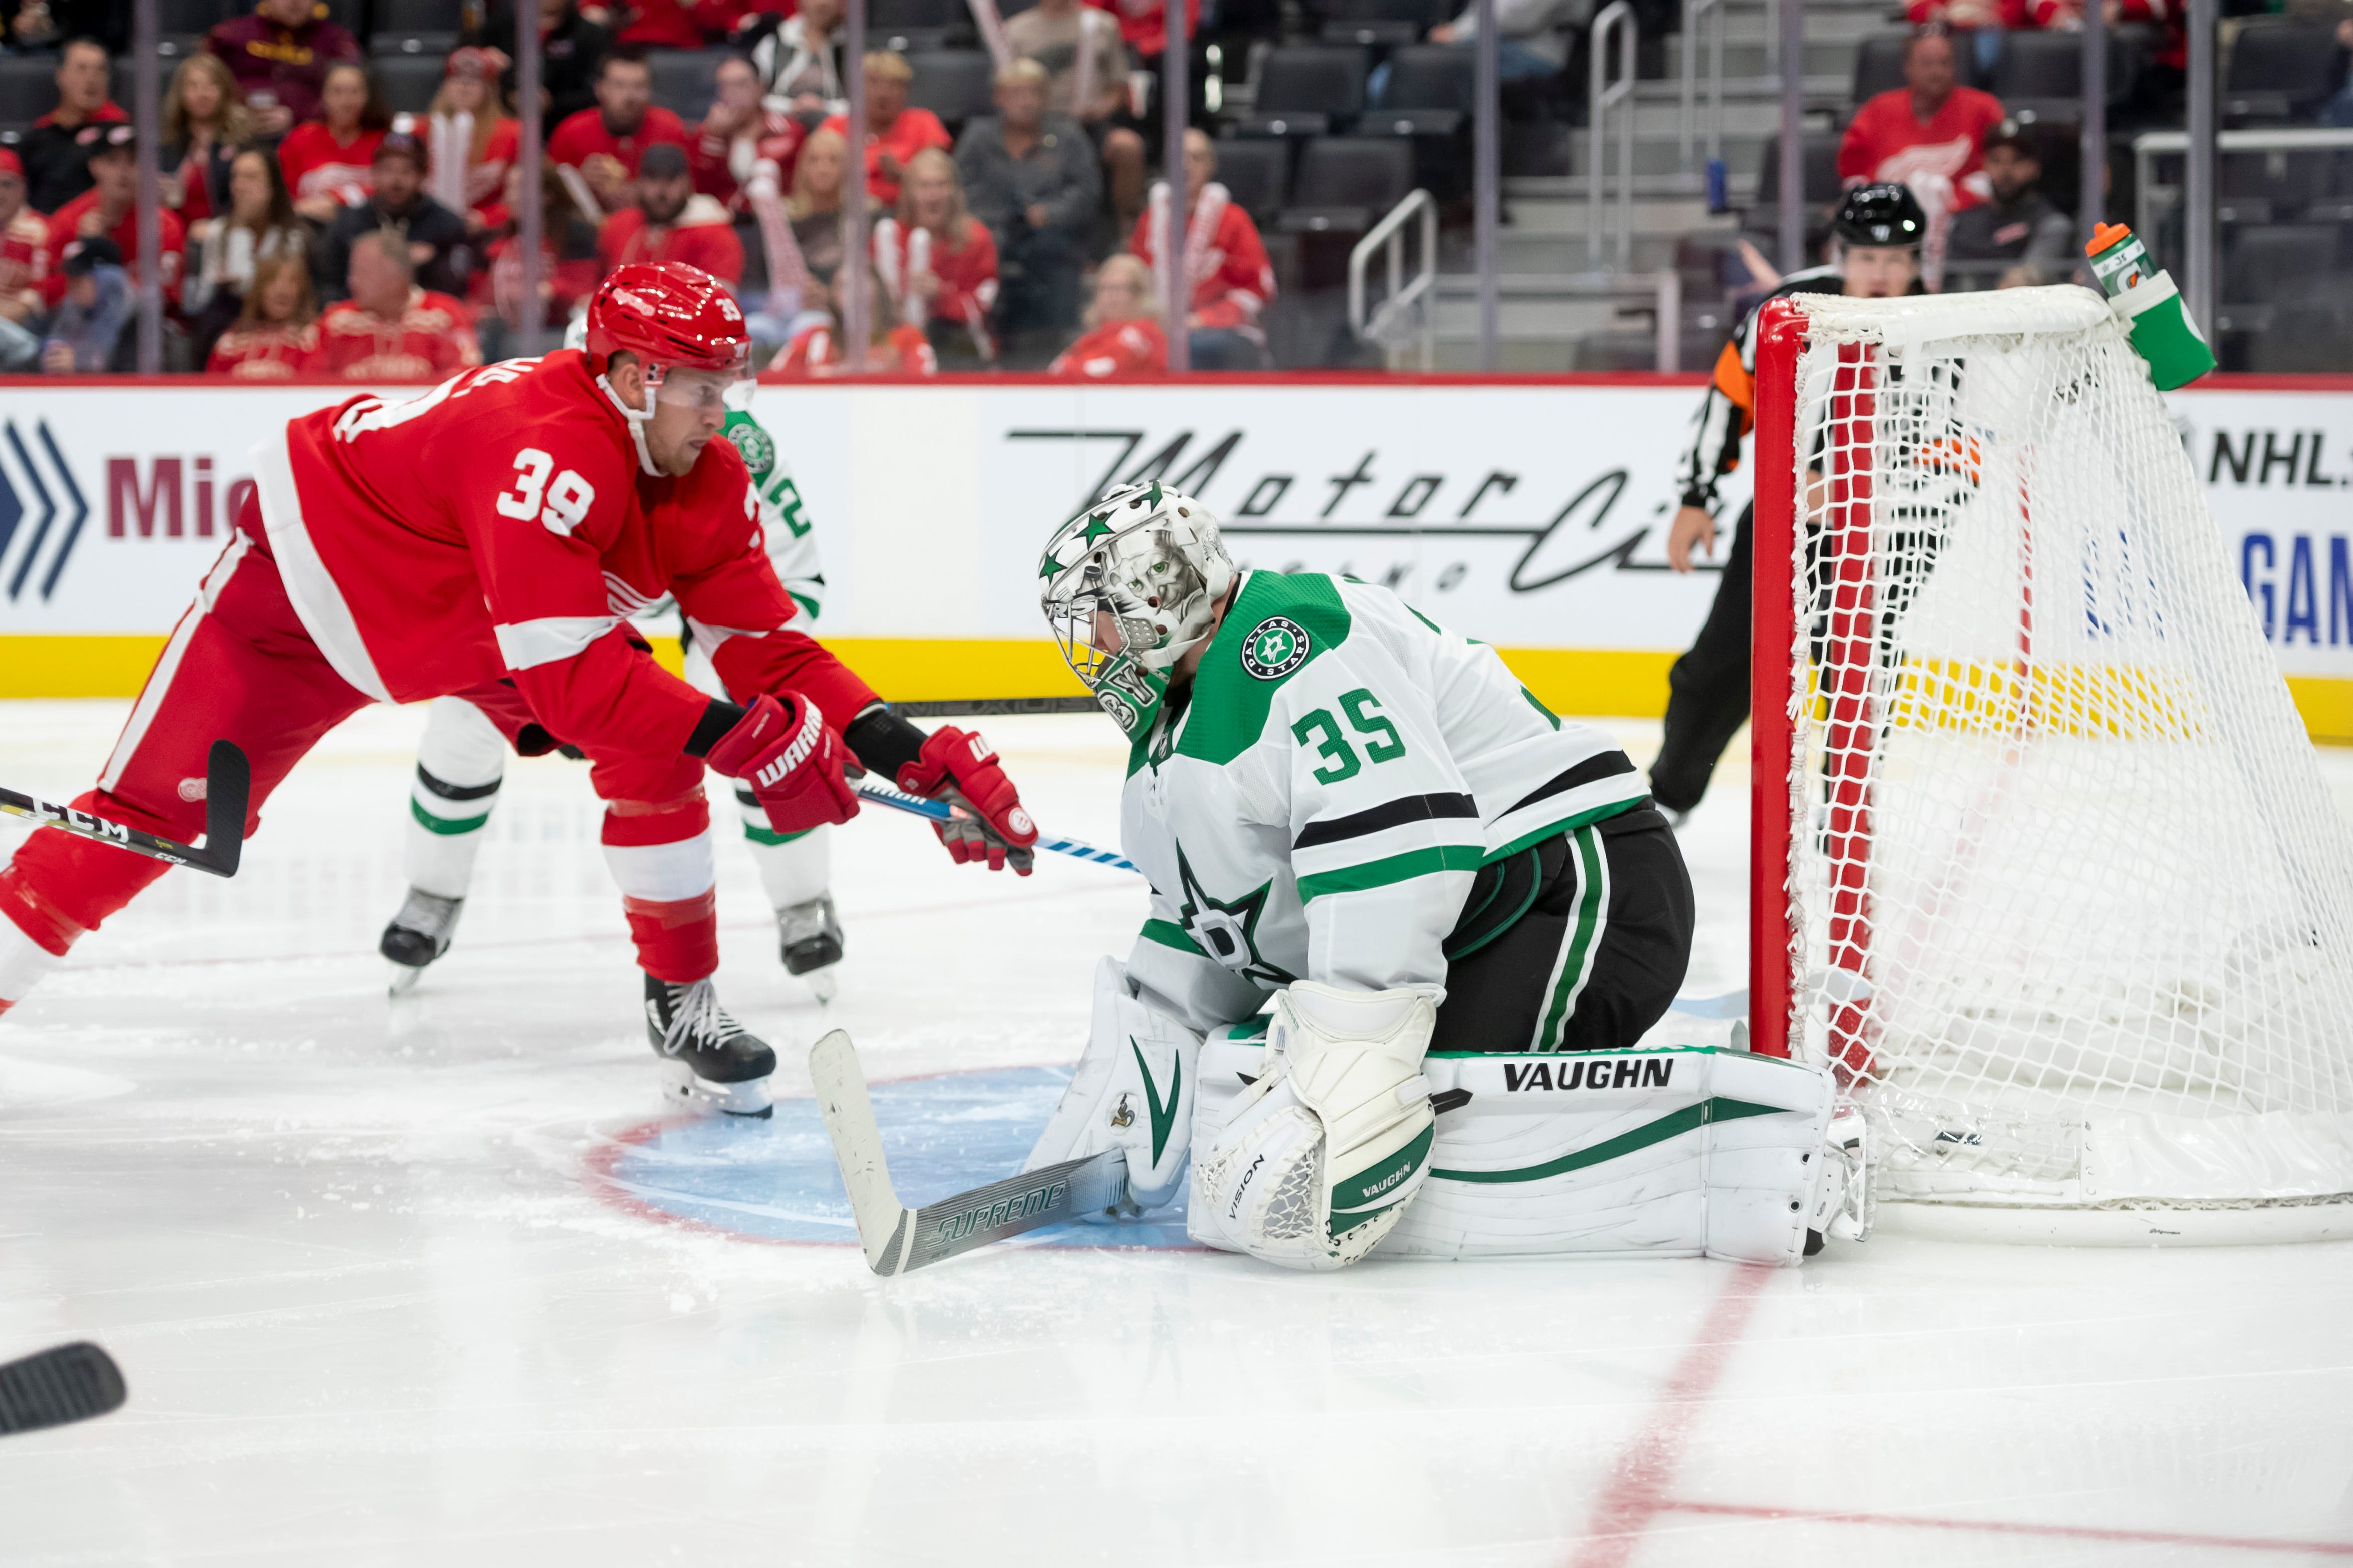 Detroit right wing Anthony Mantha slips the puck past Dallas goaltender Anton Khudobin for his third goal of the game in the third period.